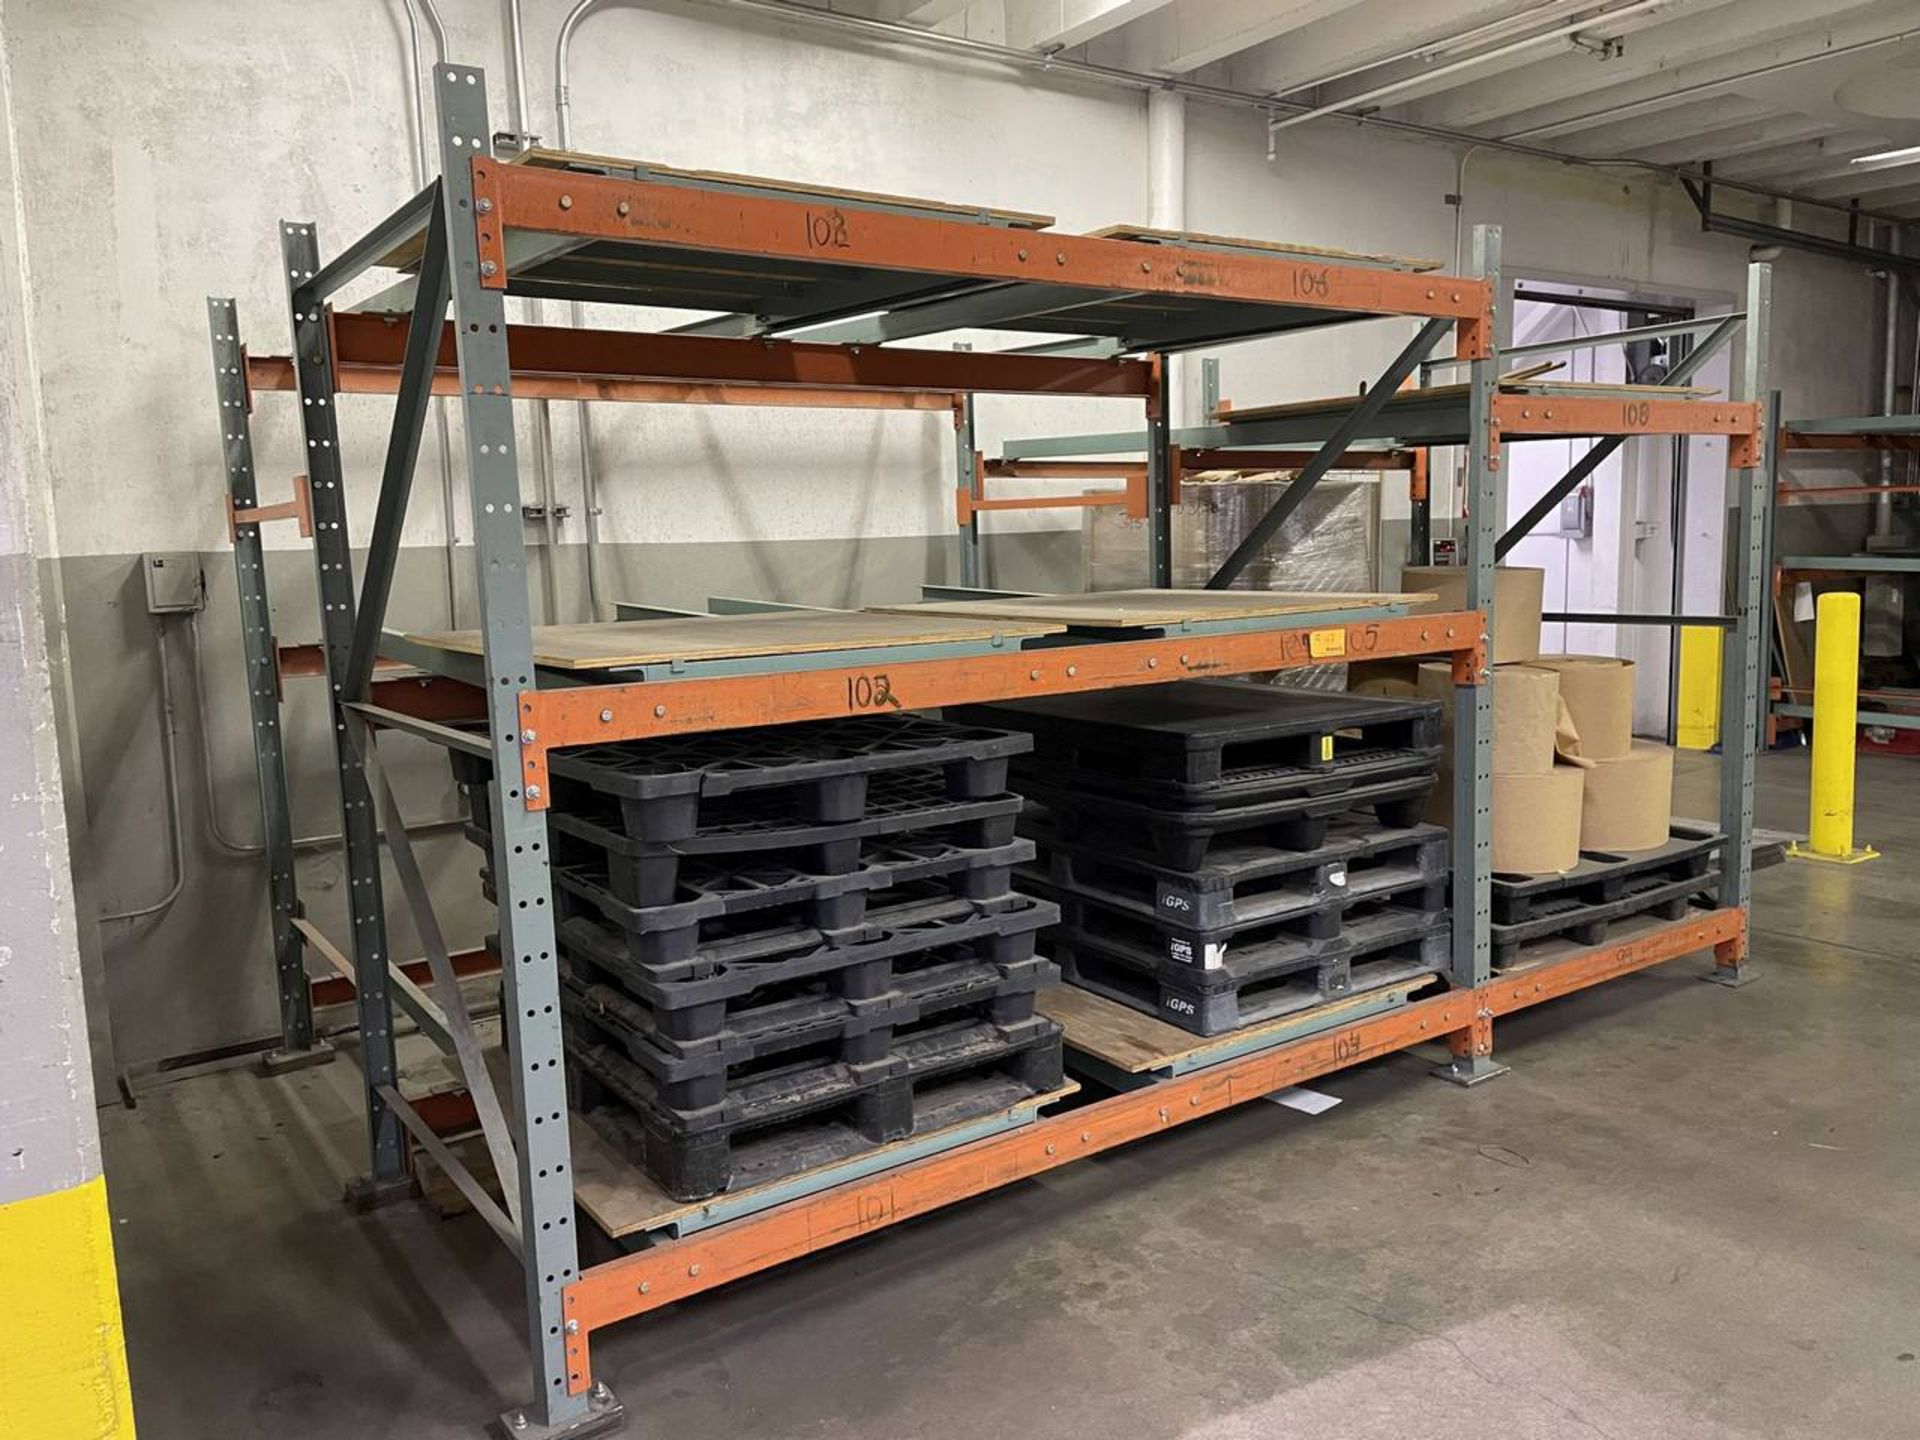 Lot of 2-Deep Push Back Pallet Racking (16 Pallet Positions) - Image 2 of 5